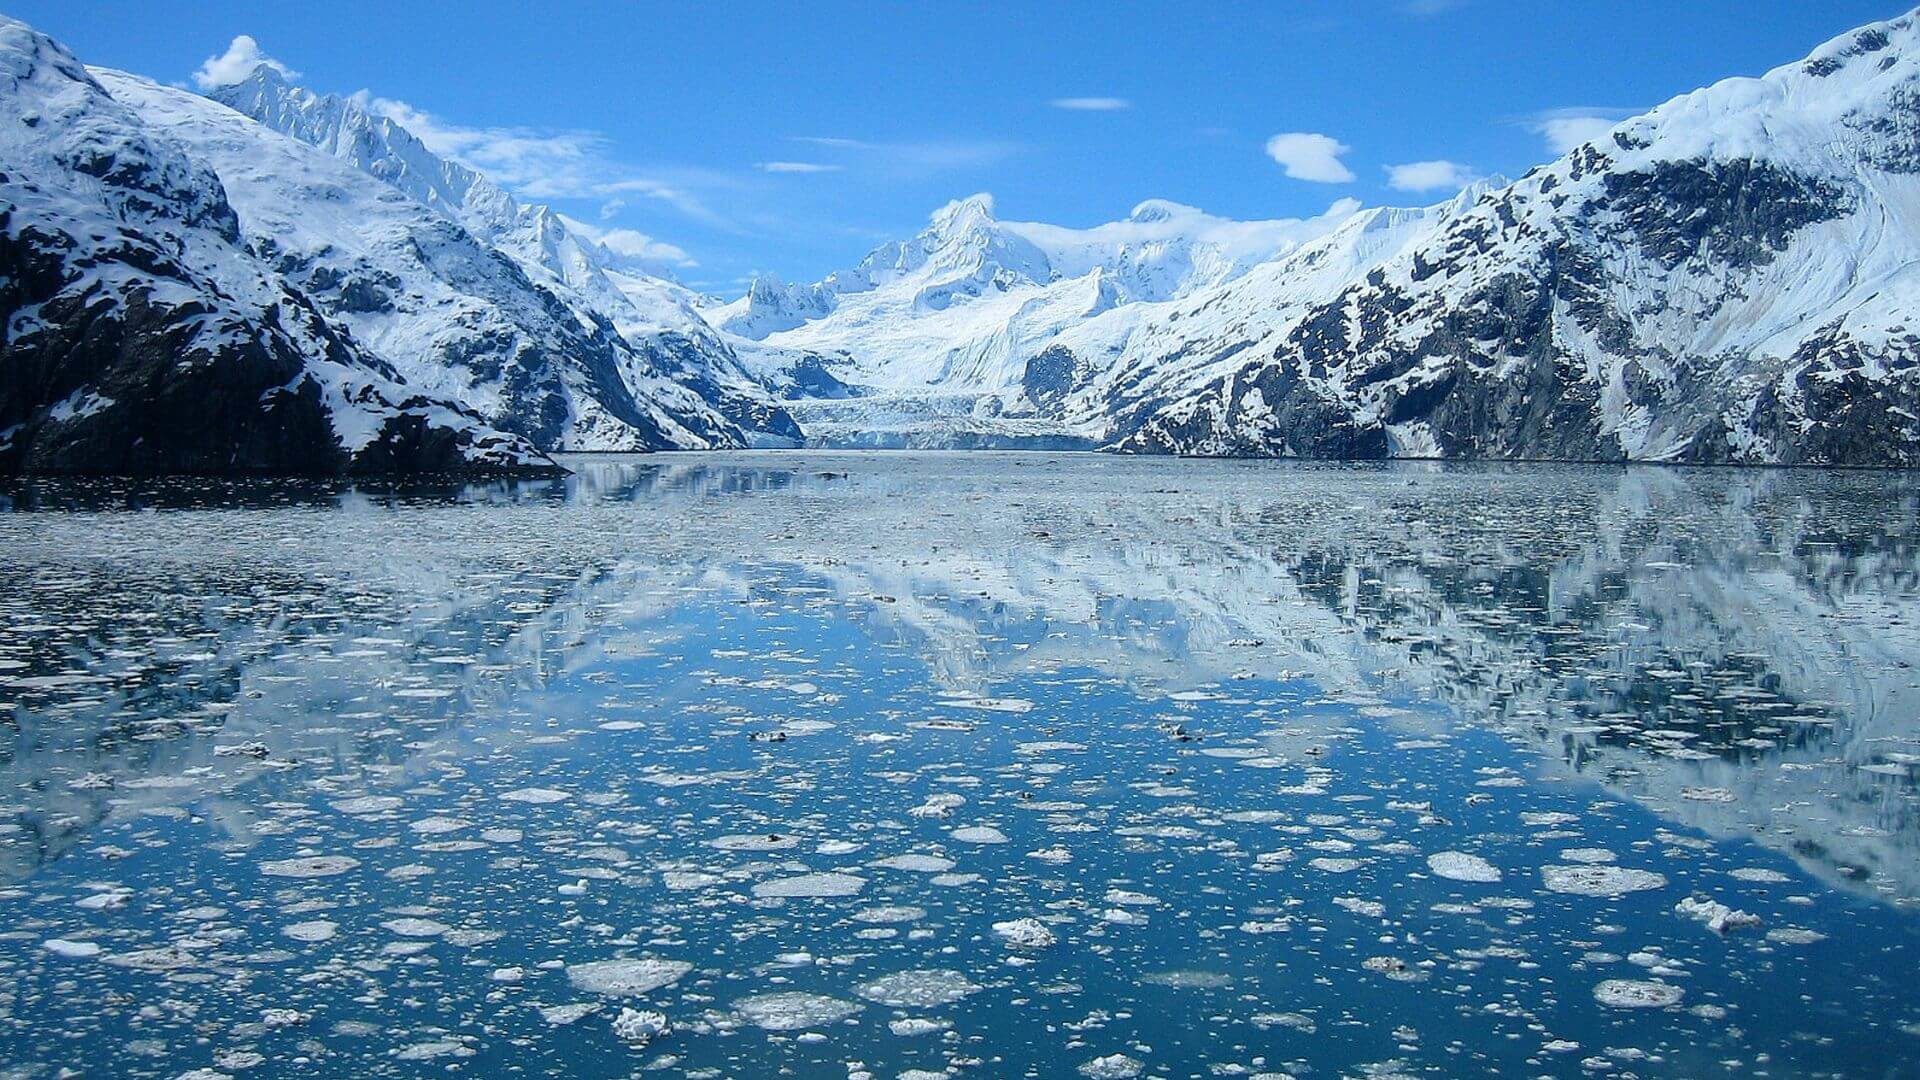 Snow-capped mountains reflecting in ice covered lake.